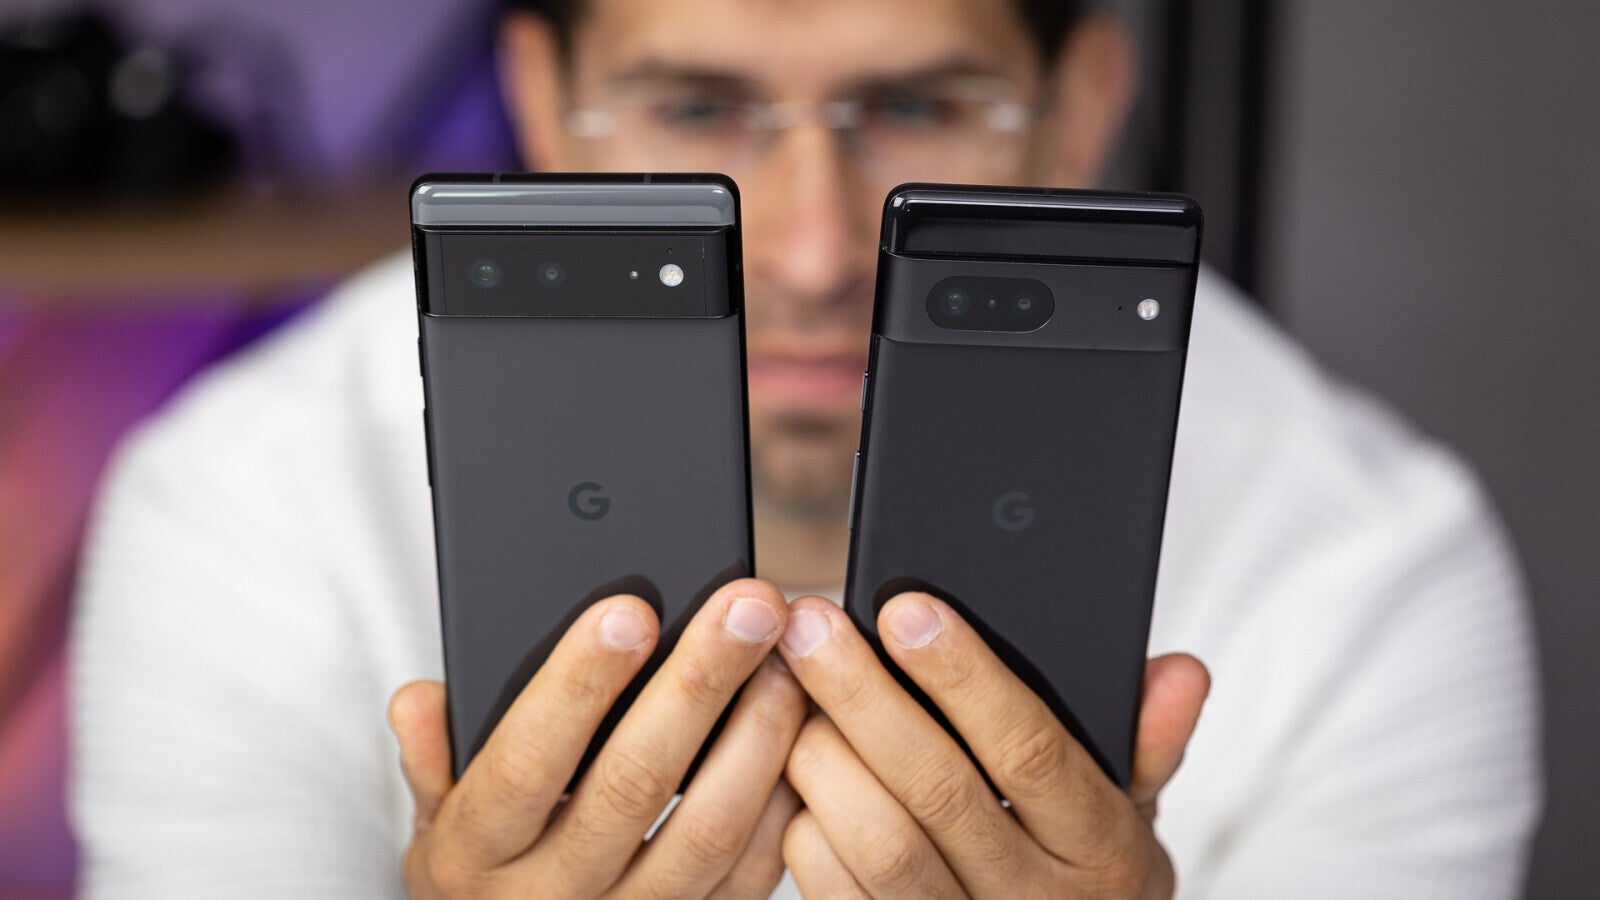 Google's biggest competitor might be... Google. - It took Google 5 years! Pixel 7 is the easiest to recommend Android flagship phone right now!